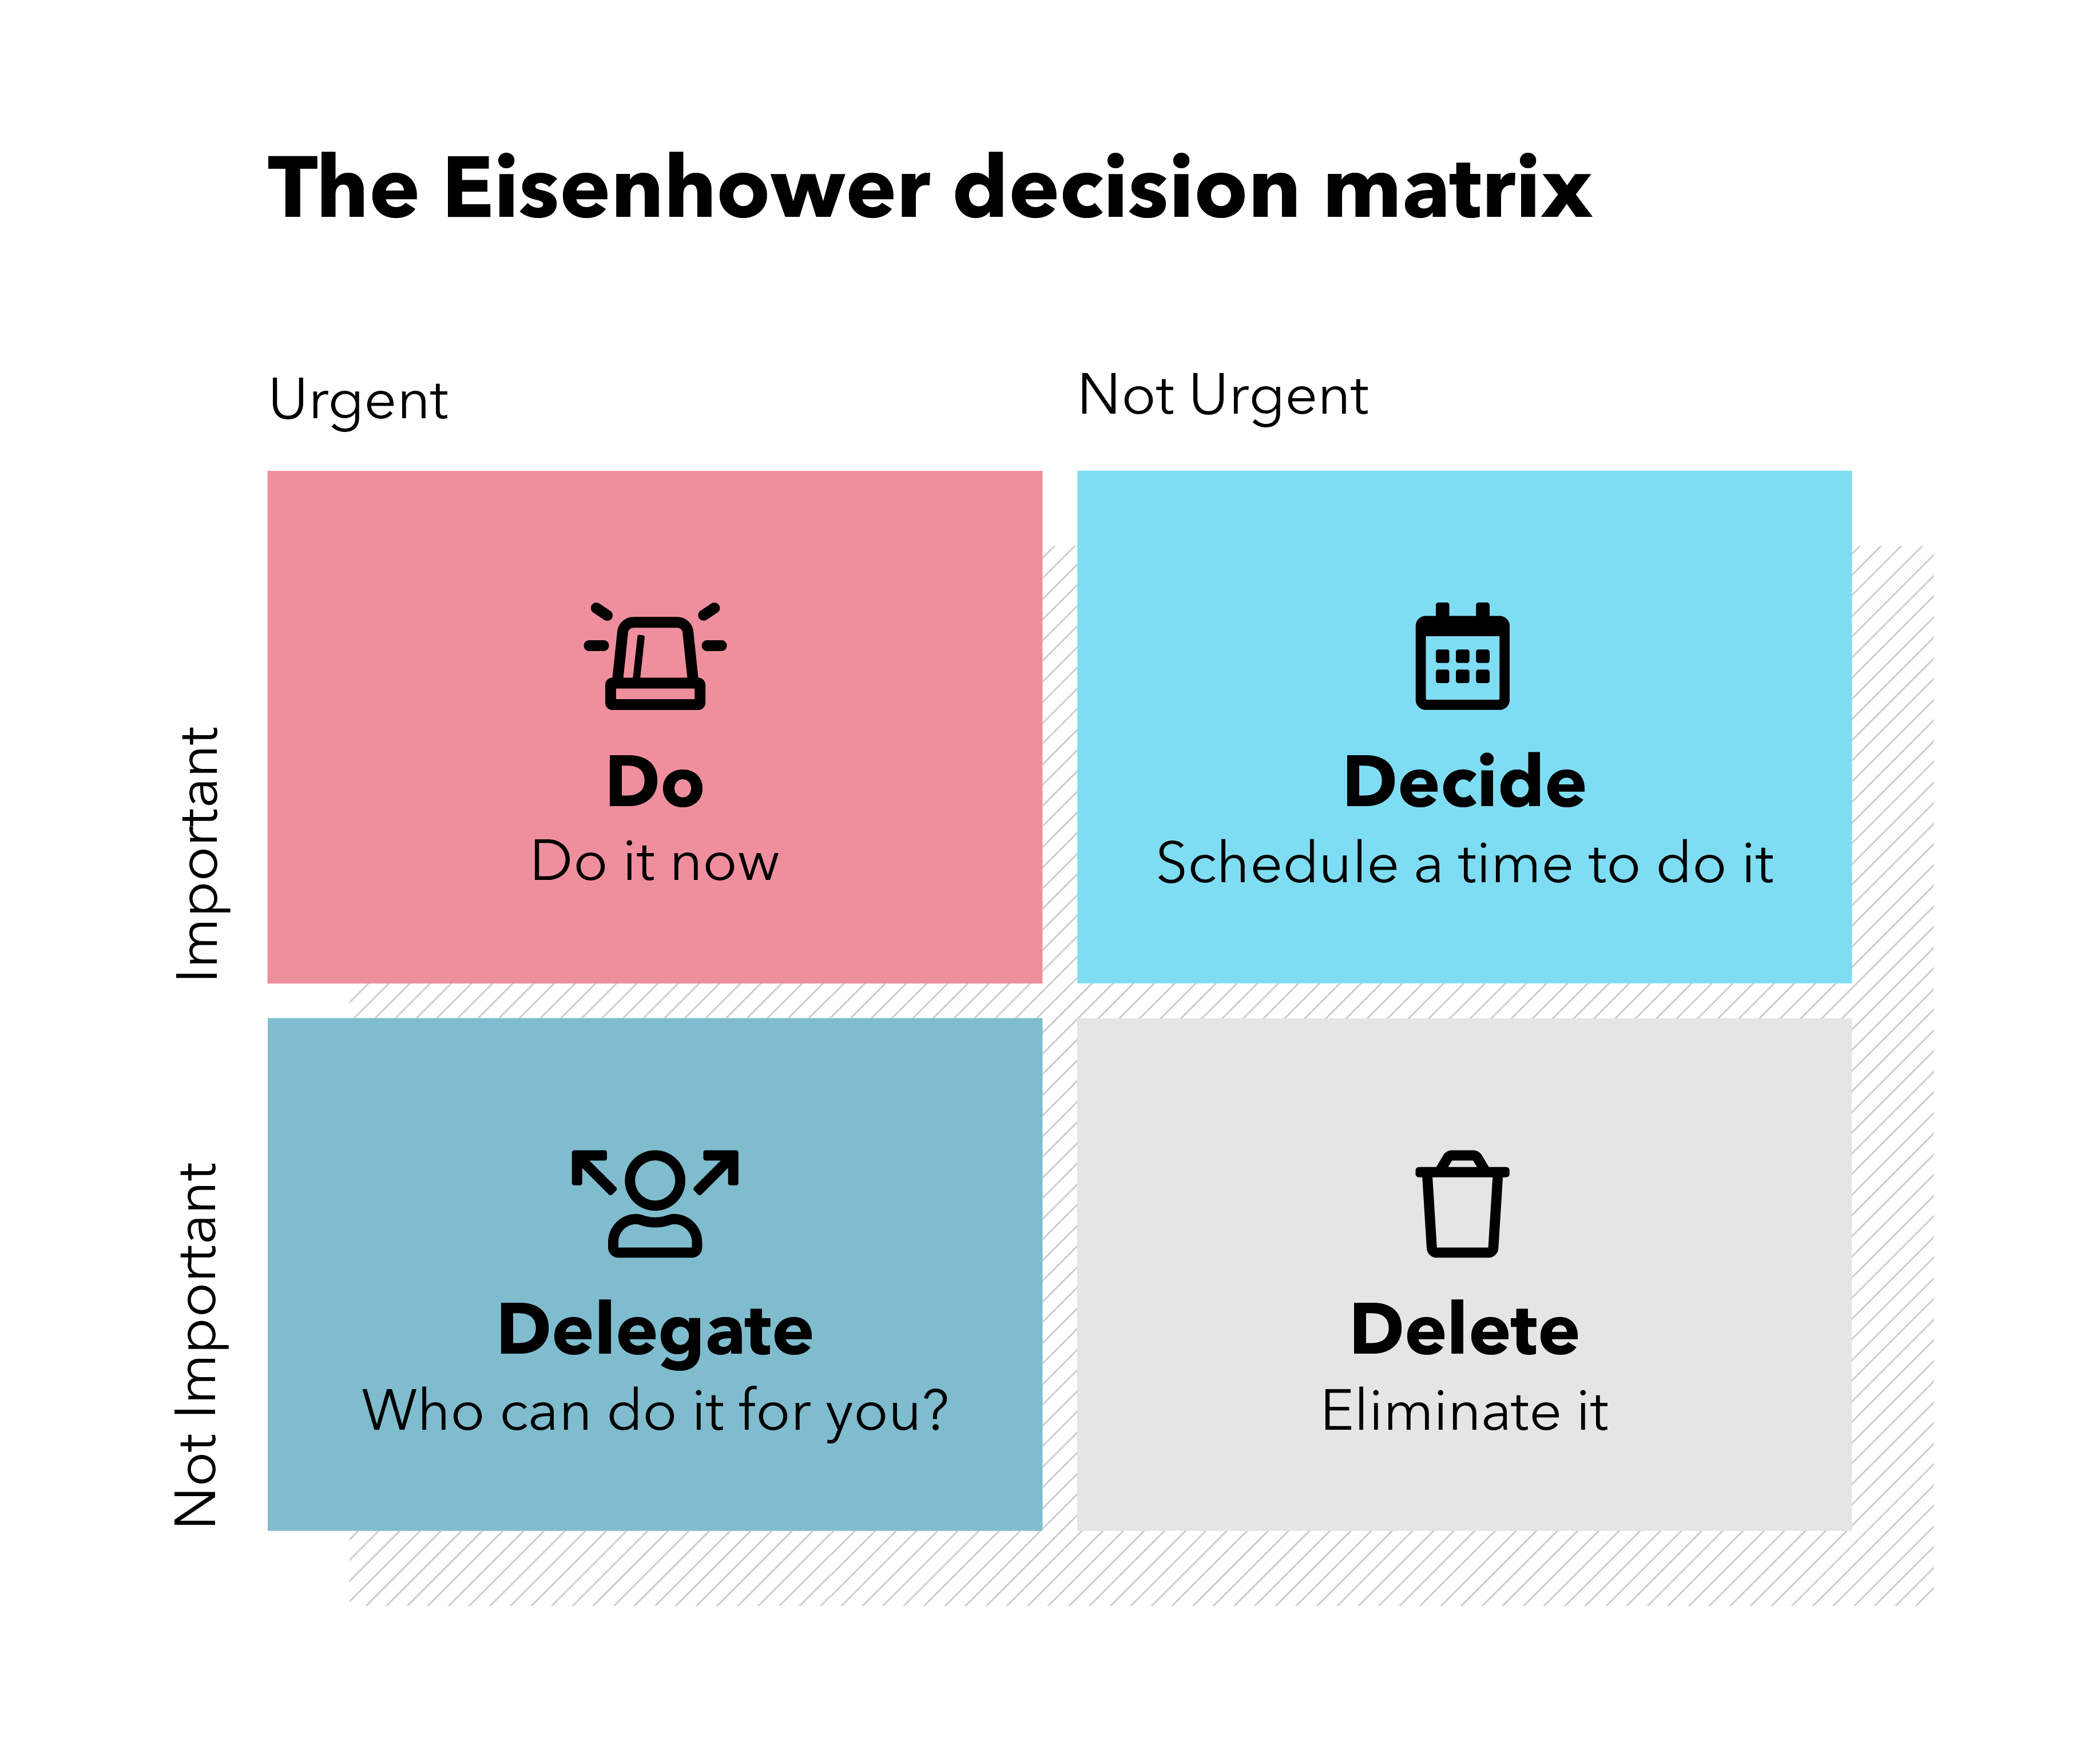  The Eisenhower Matrix is a time management tool that helps you decide what tasks to focus on. It divides tasks into four categories: important and urgent, important but not urgent, not important but urgent, and not important and not urgent. The Pomodoro Technique is a time management method that helps you stay focused on your work by breaking it down into 25-minute intervals, with 5-minute breaks in between.